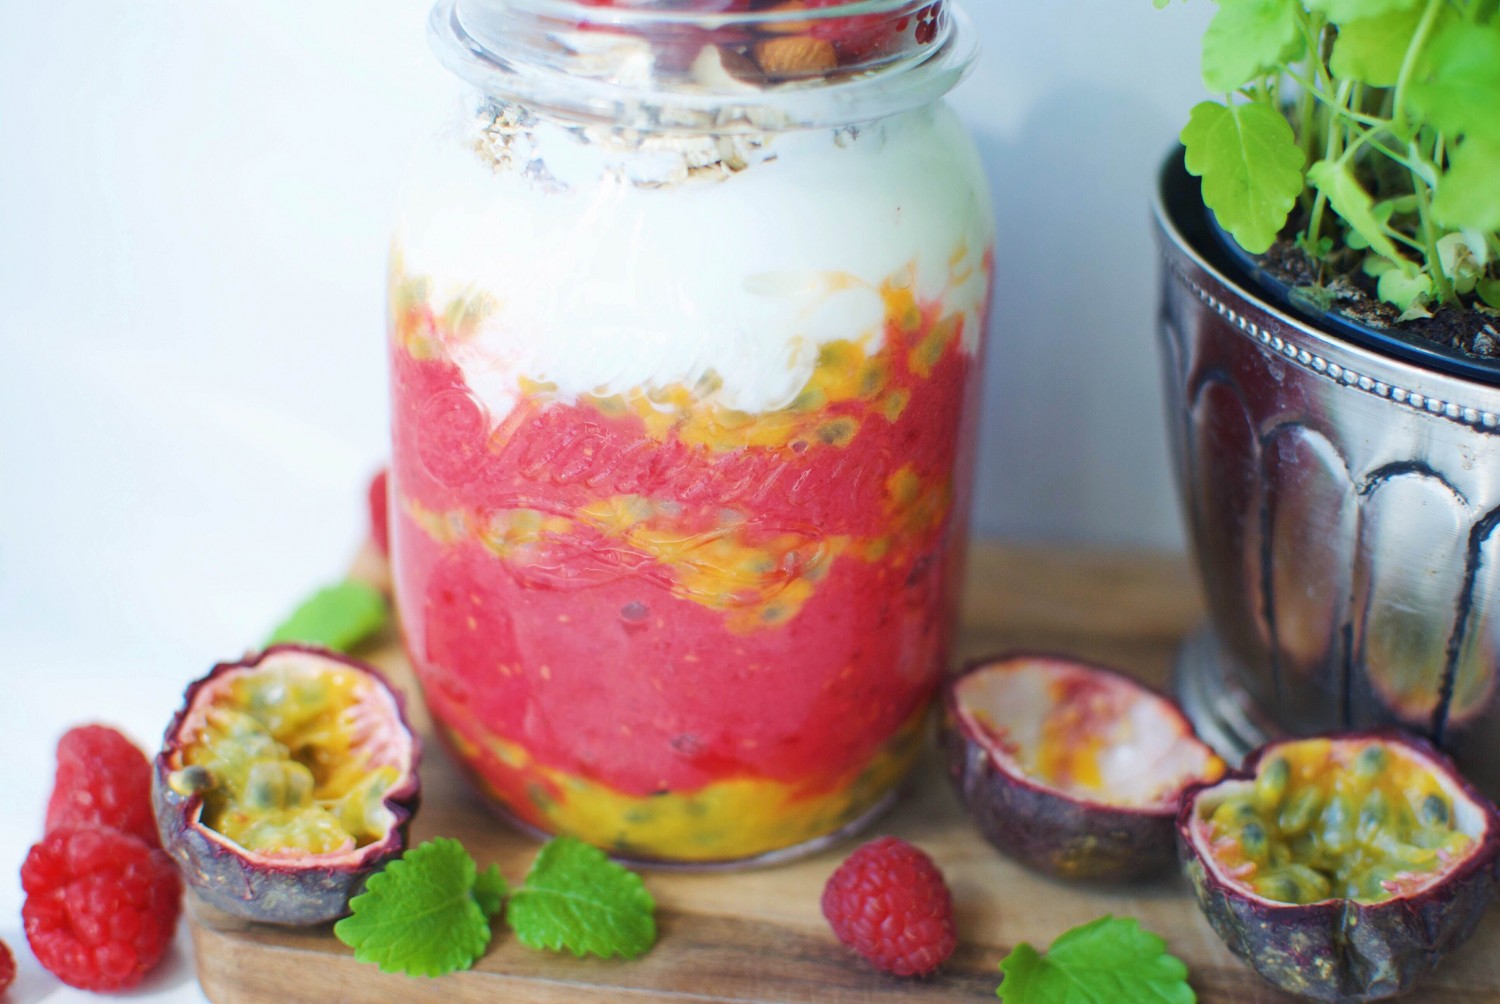 Breakfast parfait with raspberry and passion fruit